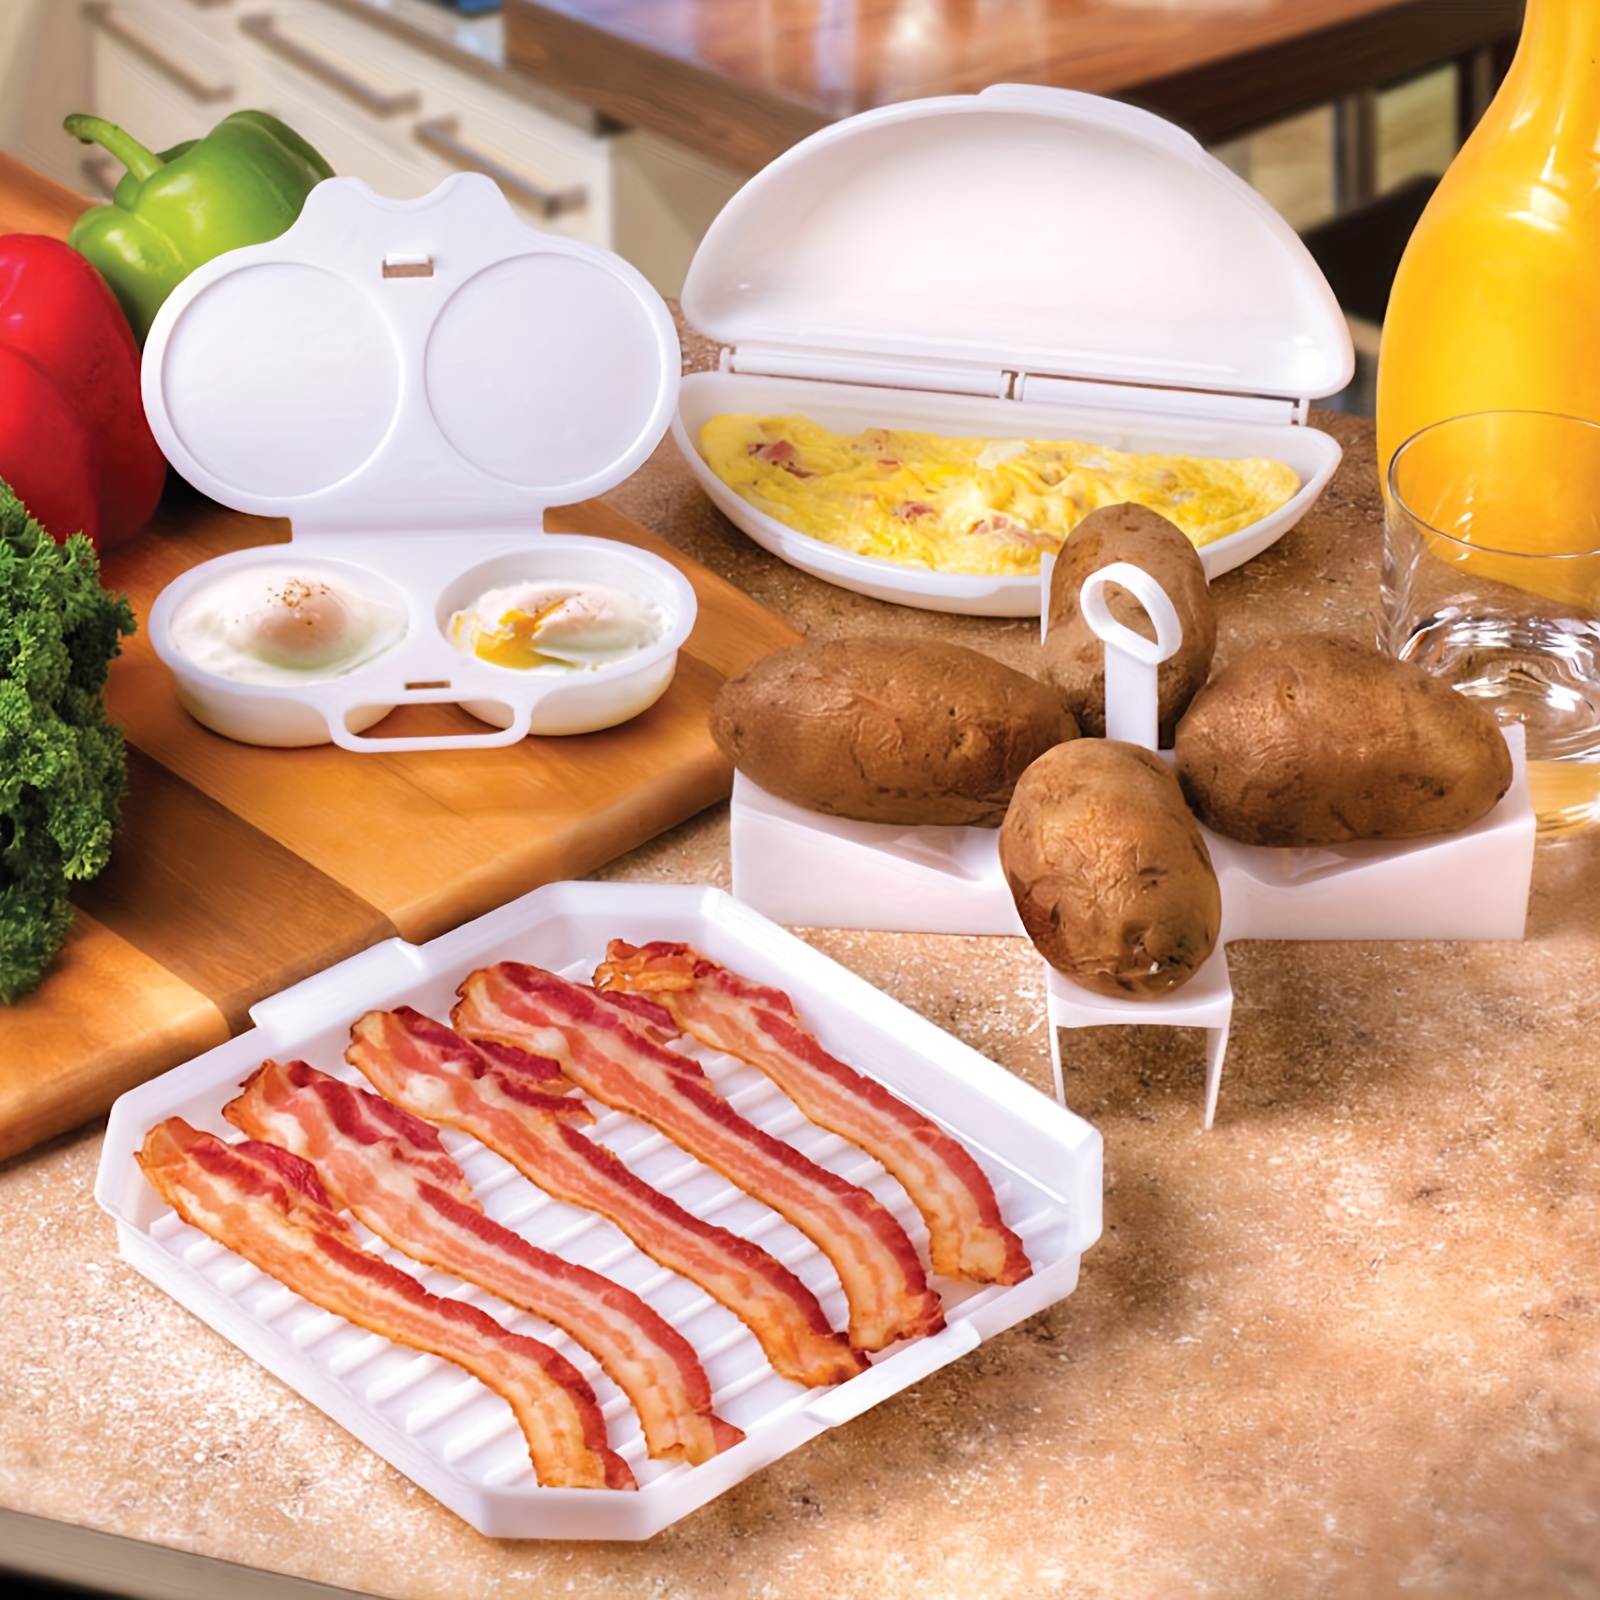 Home Kitchen Toy Breakfast Machine Steaming Frying Boiling - Temu